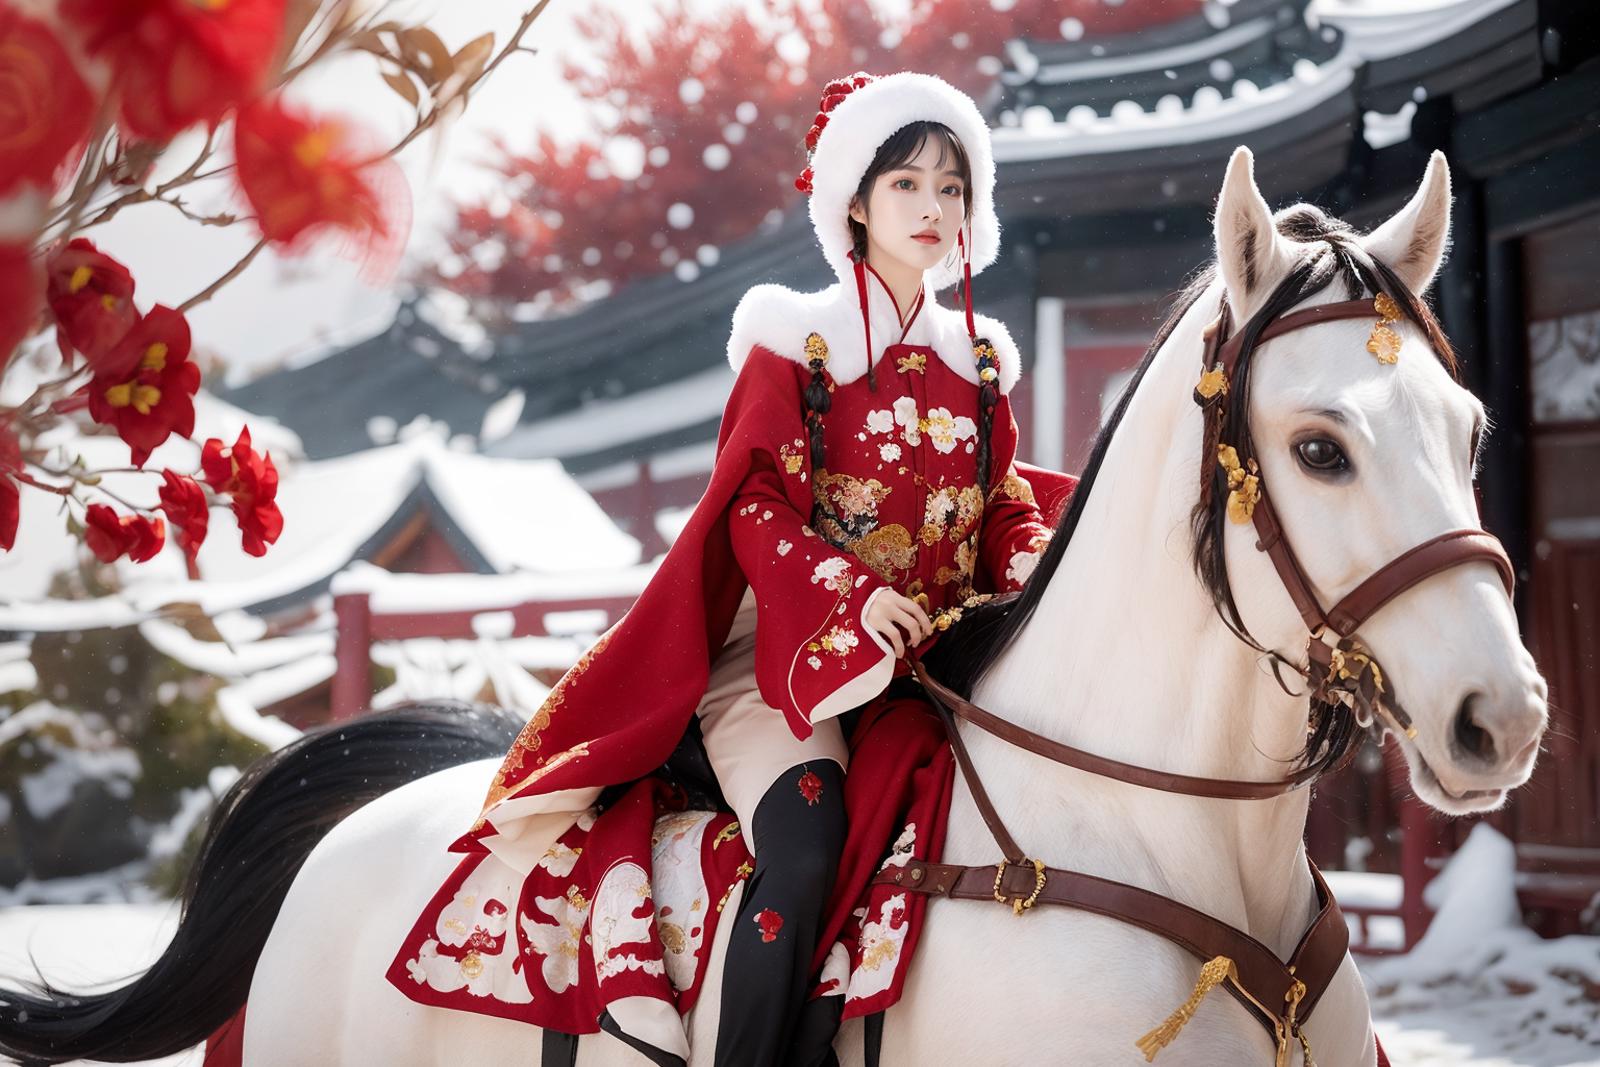 A woman in a Chinese dress riding a white horse with a golden bridle.